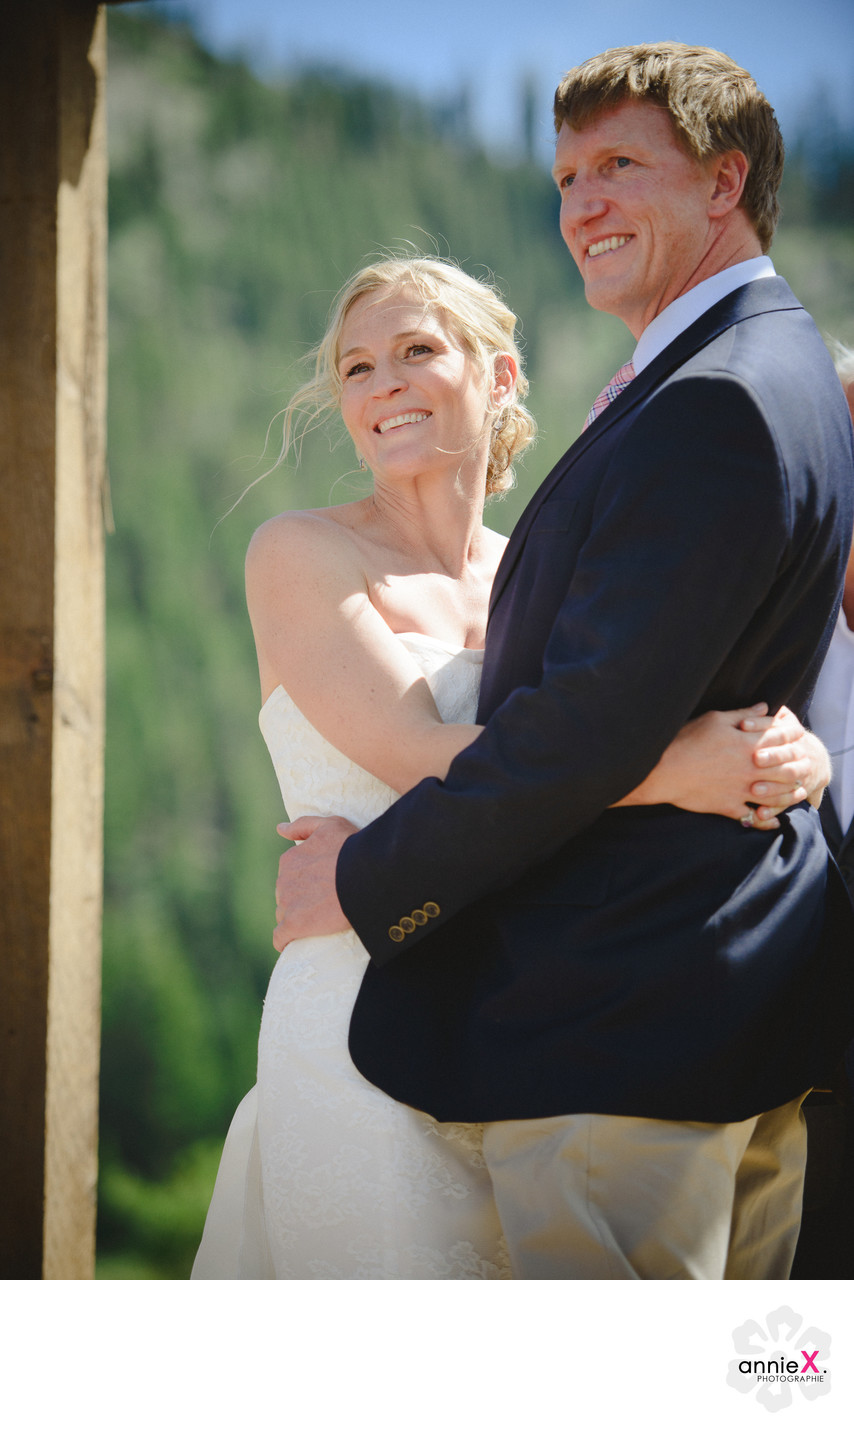 Most fun Wedding photographer at the Stables in Squaw
